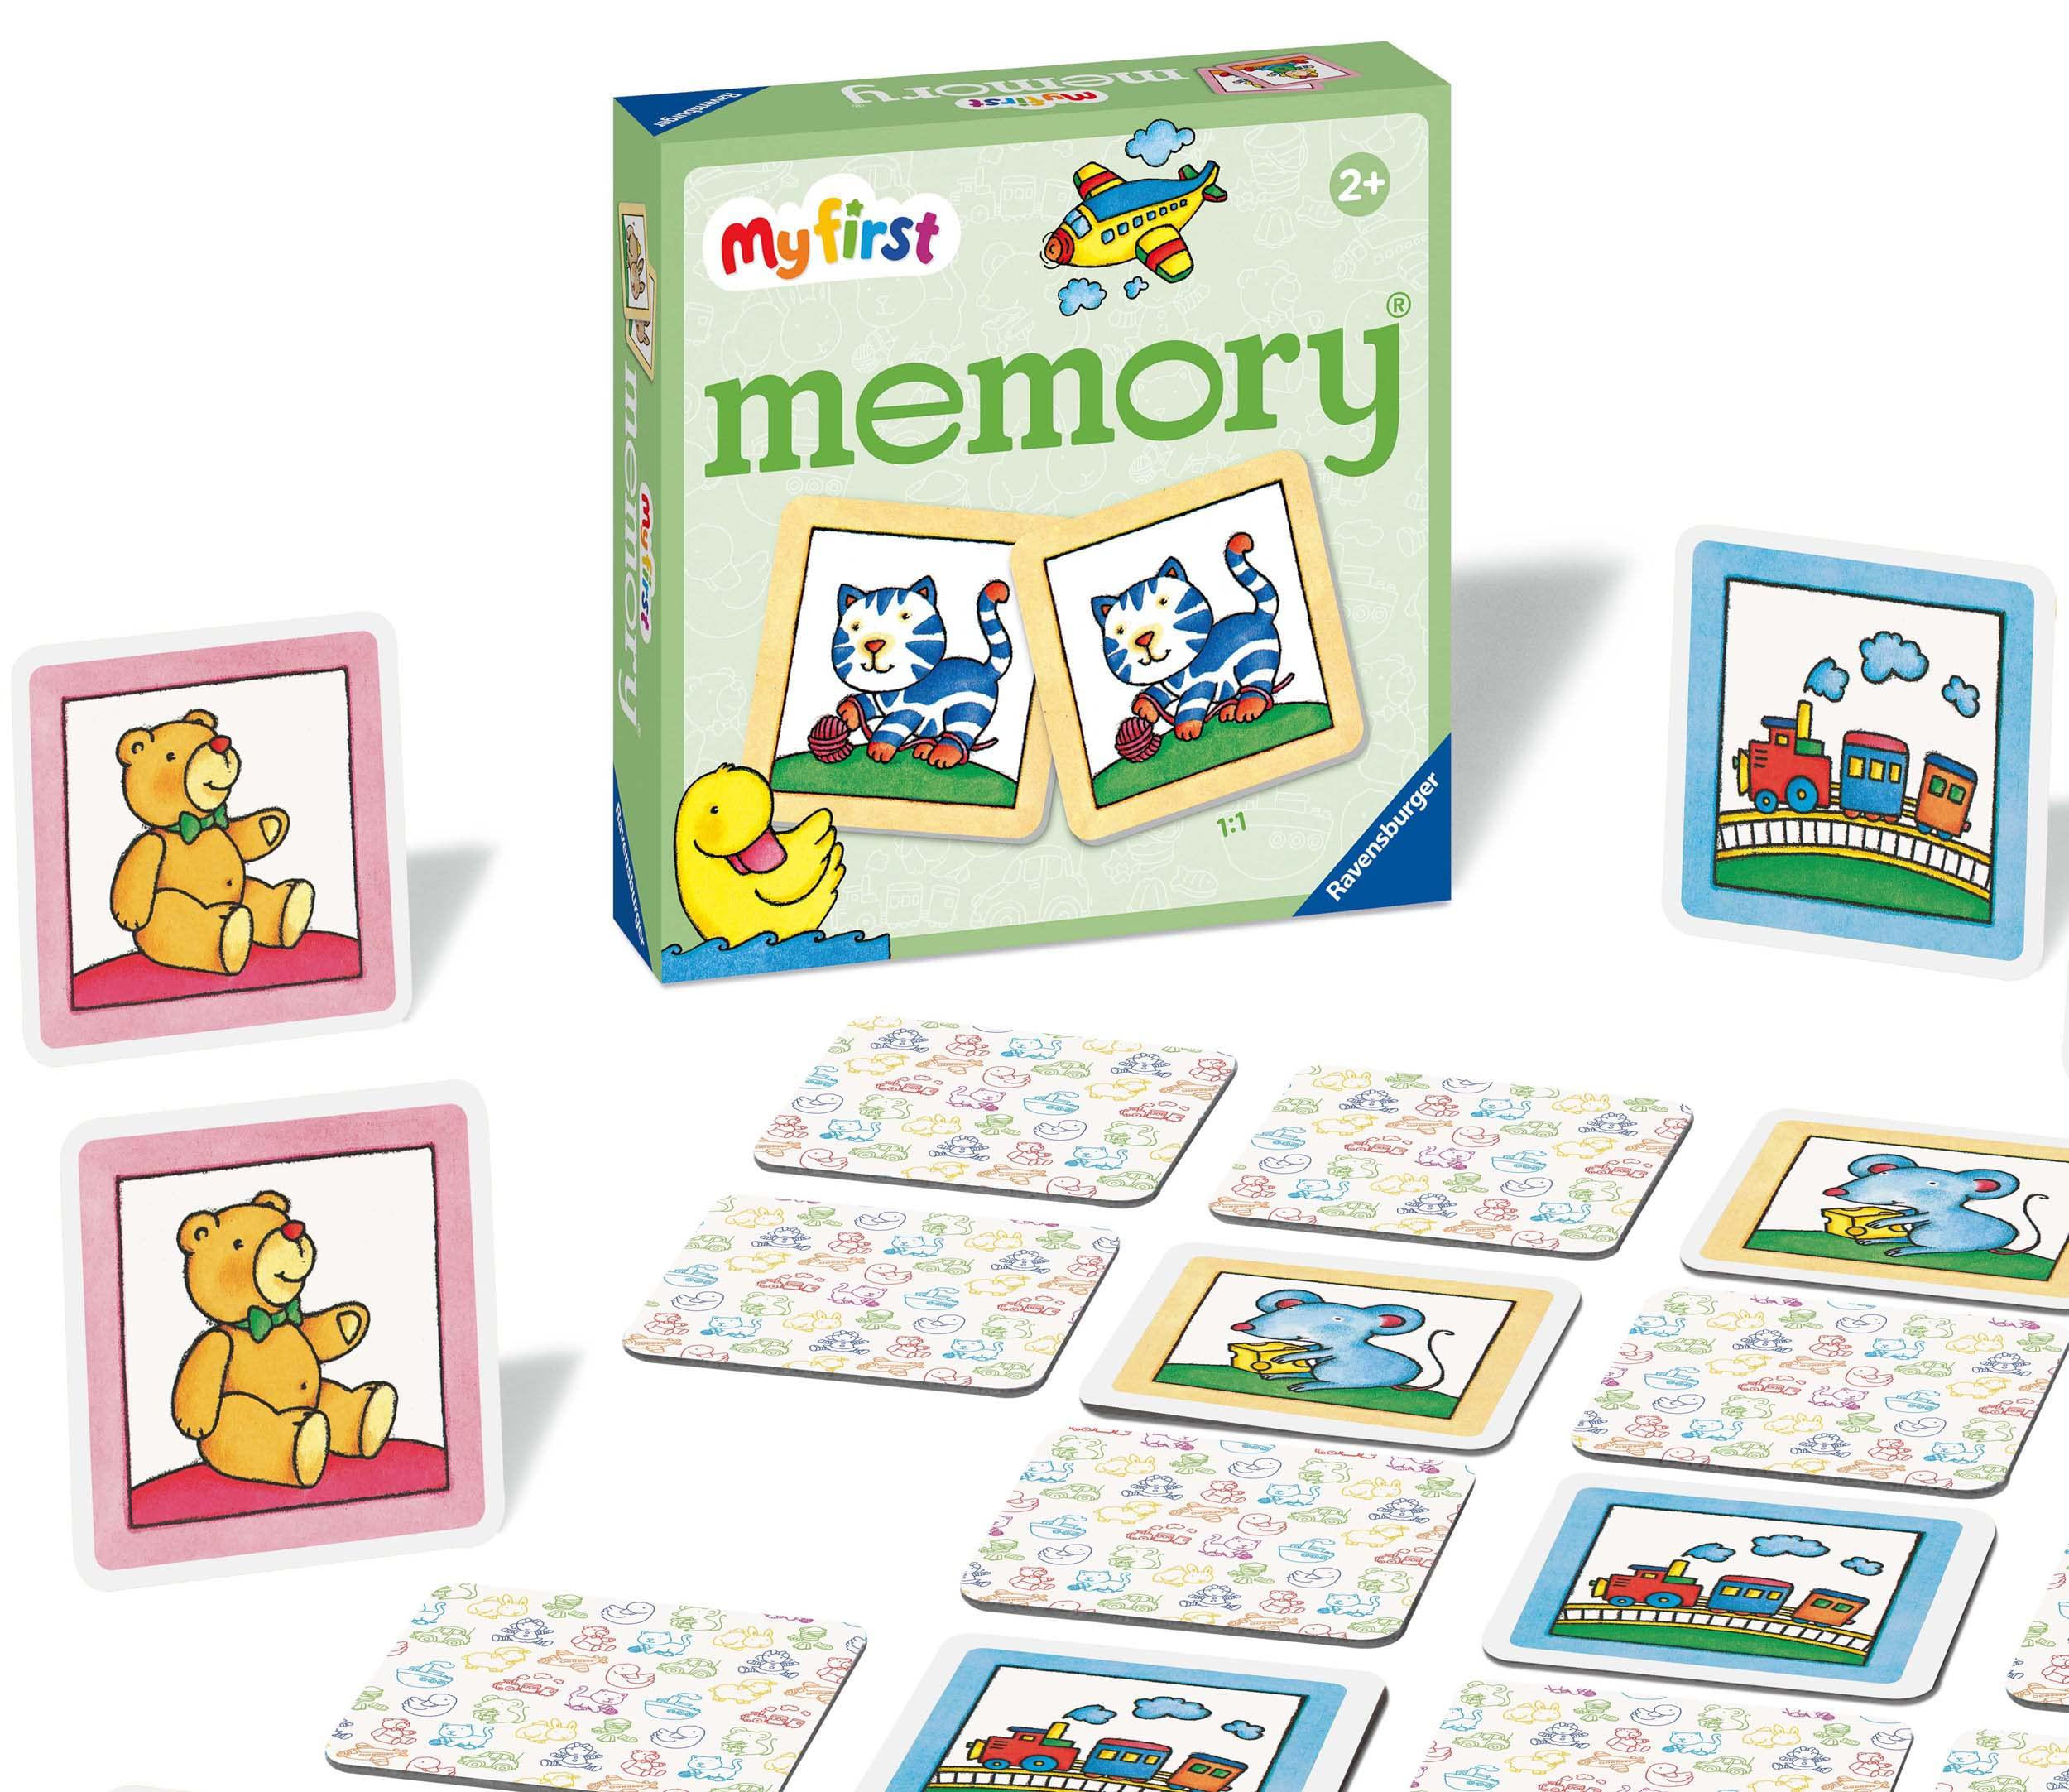 ravensburger favorite things my first memory game for kids ages 2 and up - a fun & fast picture matching game